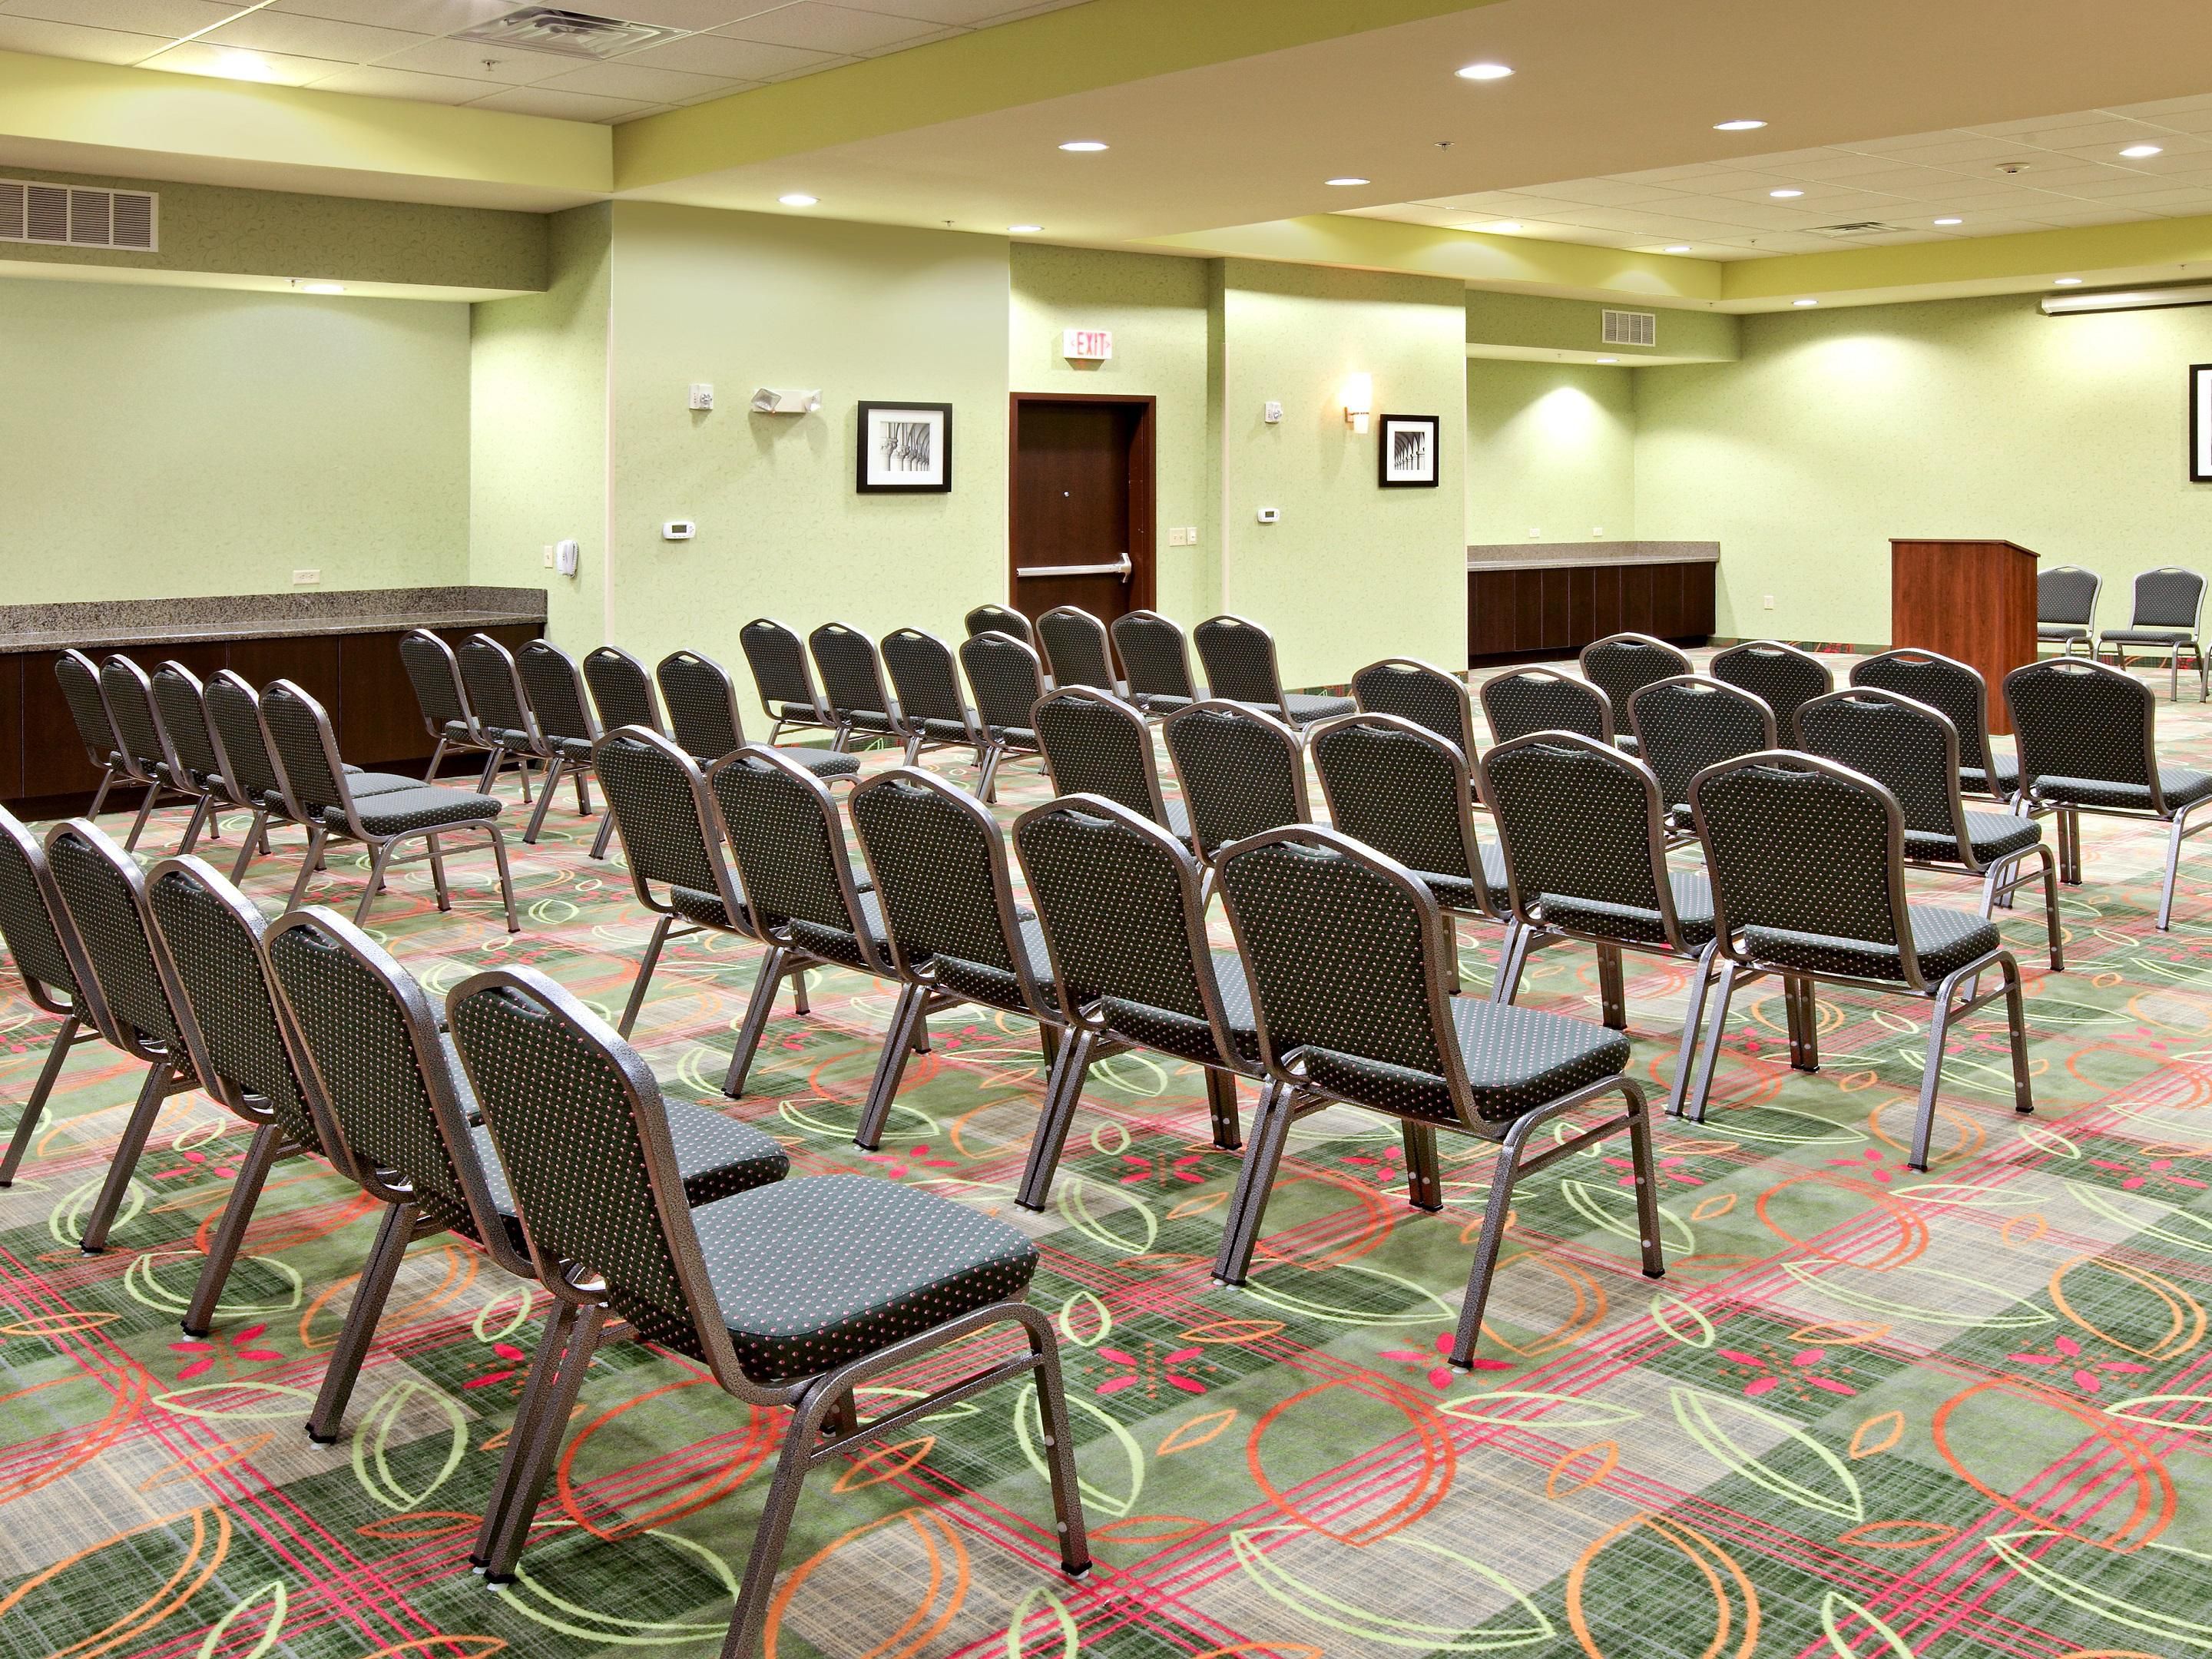 Book your next meeting at the Holiday Inn Garland. Our Banquet Space is 4257 Sq Ft and can be broken down into smaller meeting rooms. We can host your banquet up to 260 people. We can also do Theater seating up to 325 people or Classroom seating to 240 ppl.  Call us now to reserve your next event.